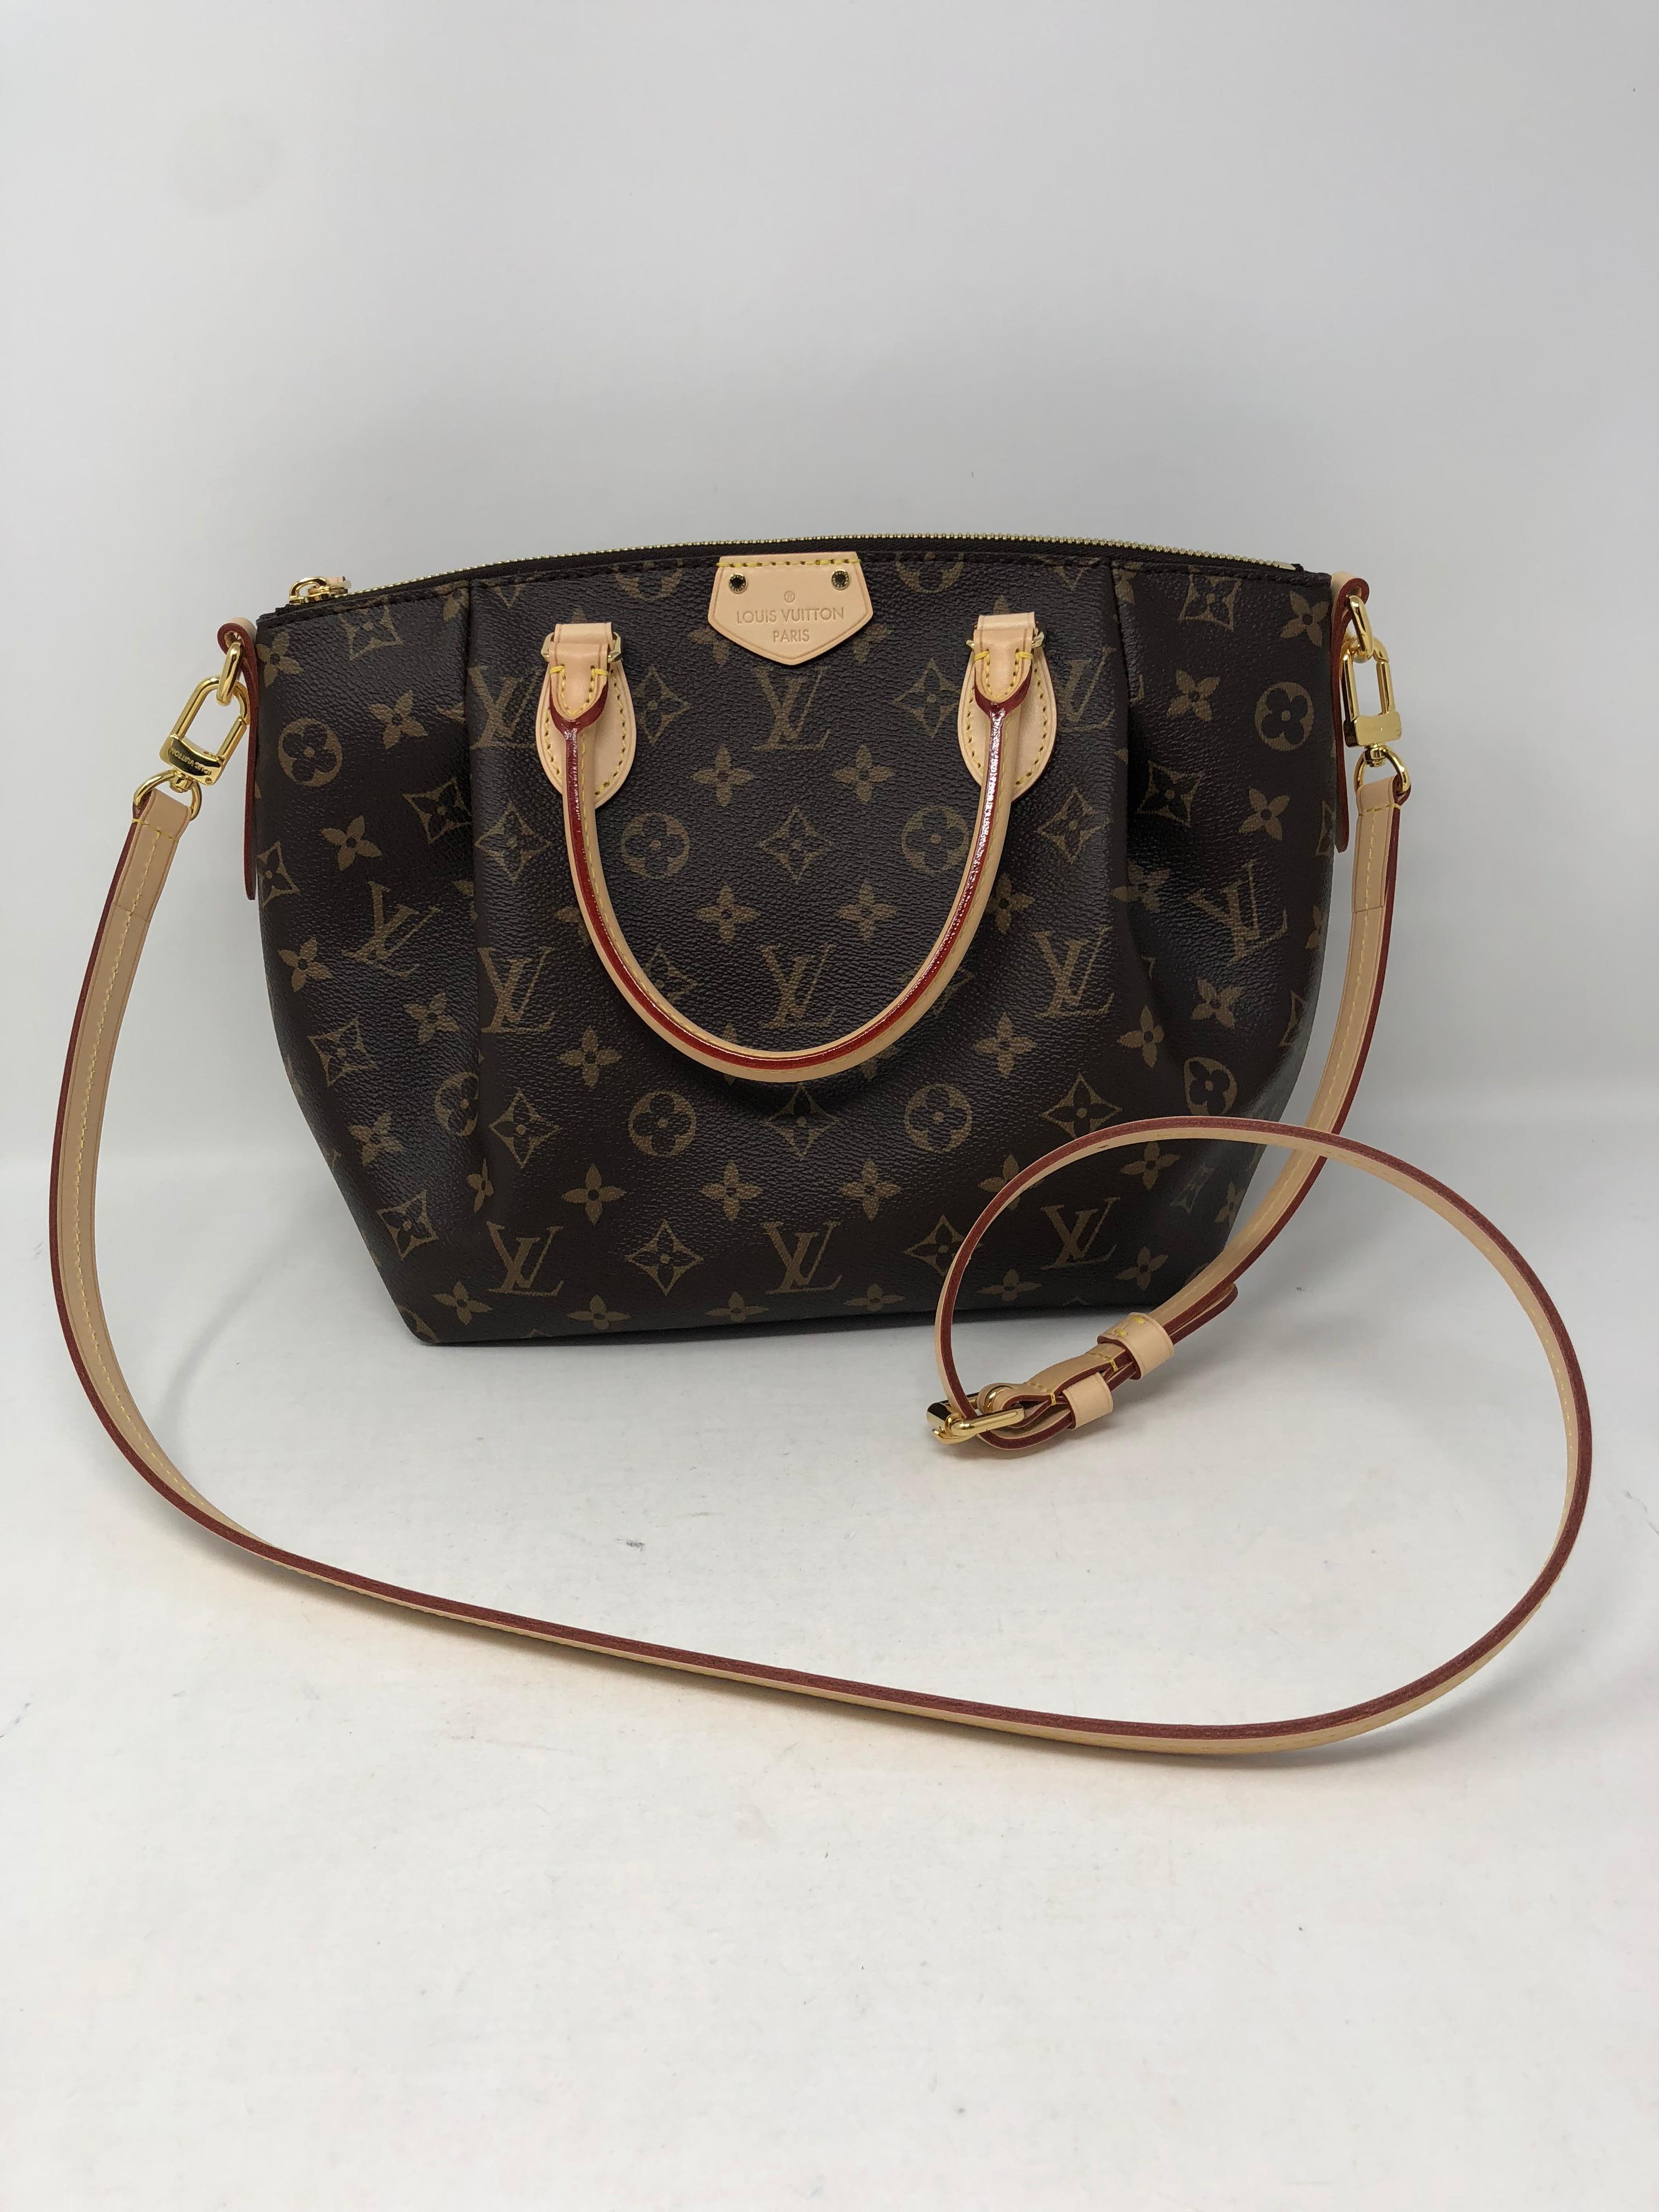 Louis Vuitton Turenne PM in monogram. Sold out at LV. Limited. A favorite style among LV lovers. Zippered top style tote and attachable strap that is also adjustable. Hard to find. Brand new and includes dust cover and box. Guaranteed authentic. 